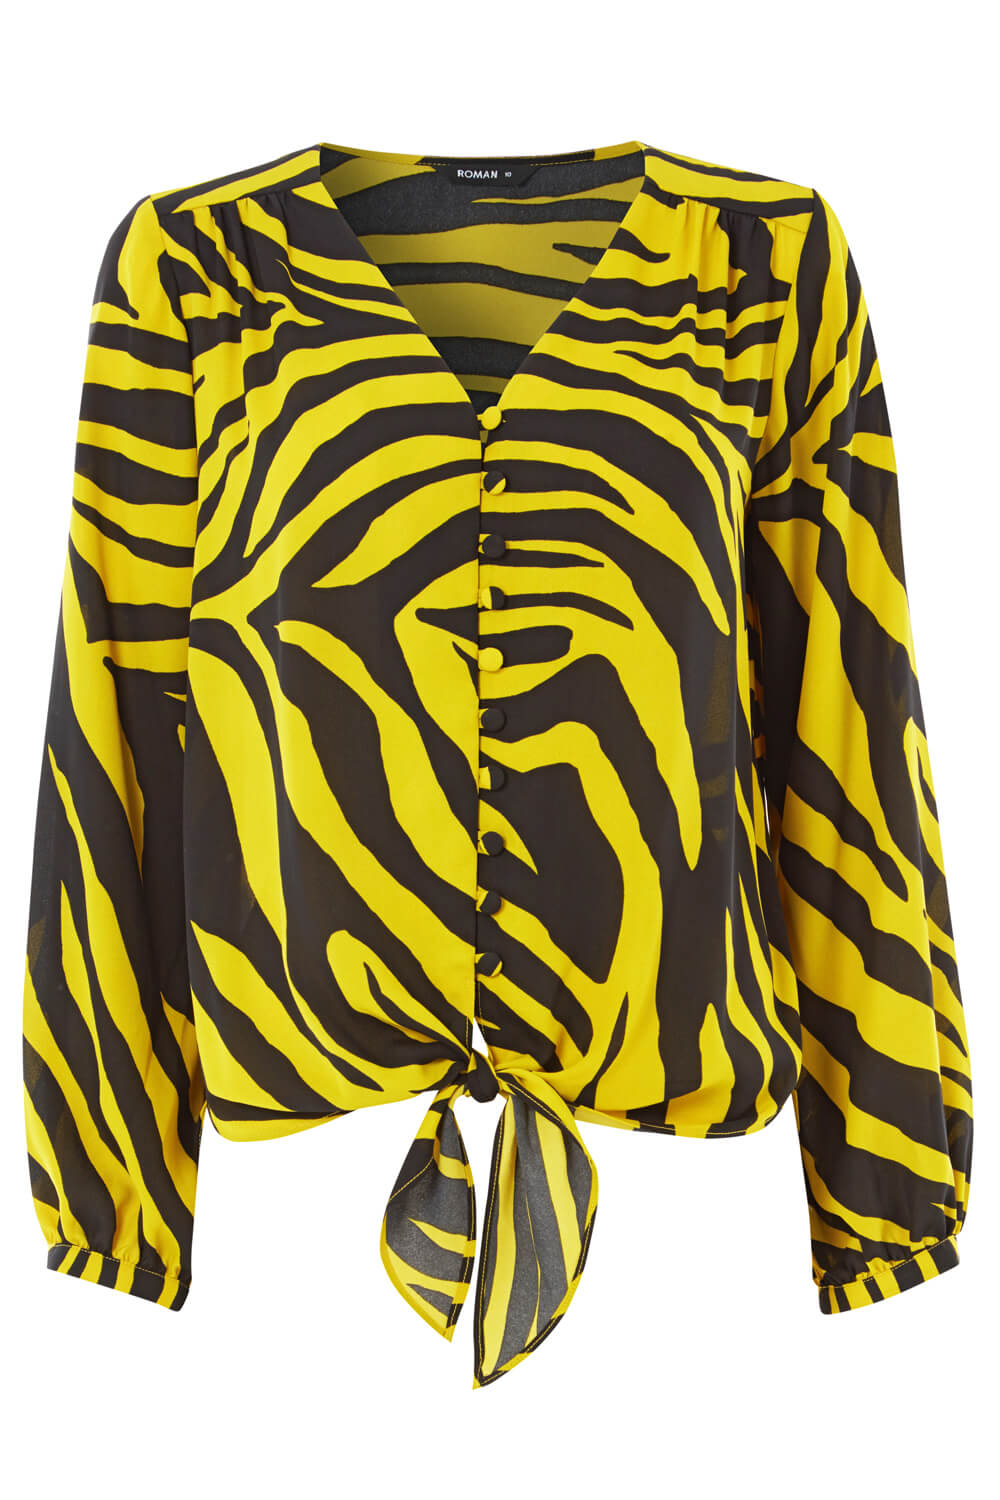 Lime Zebra Print Tie Front Blouse, Image 5 of 5